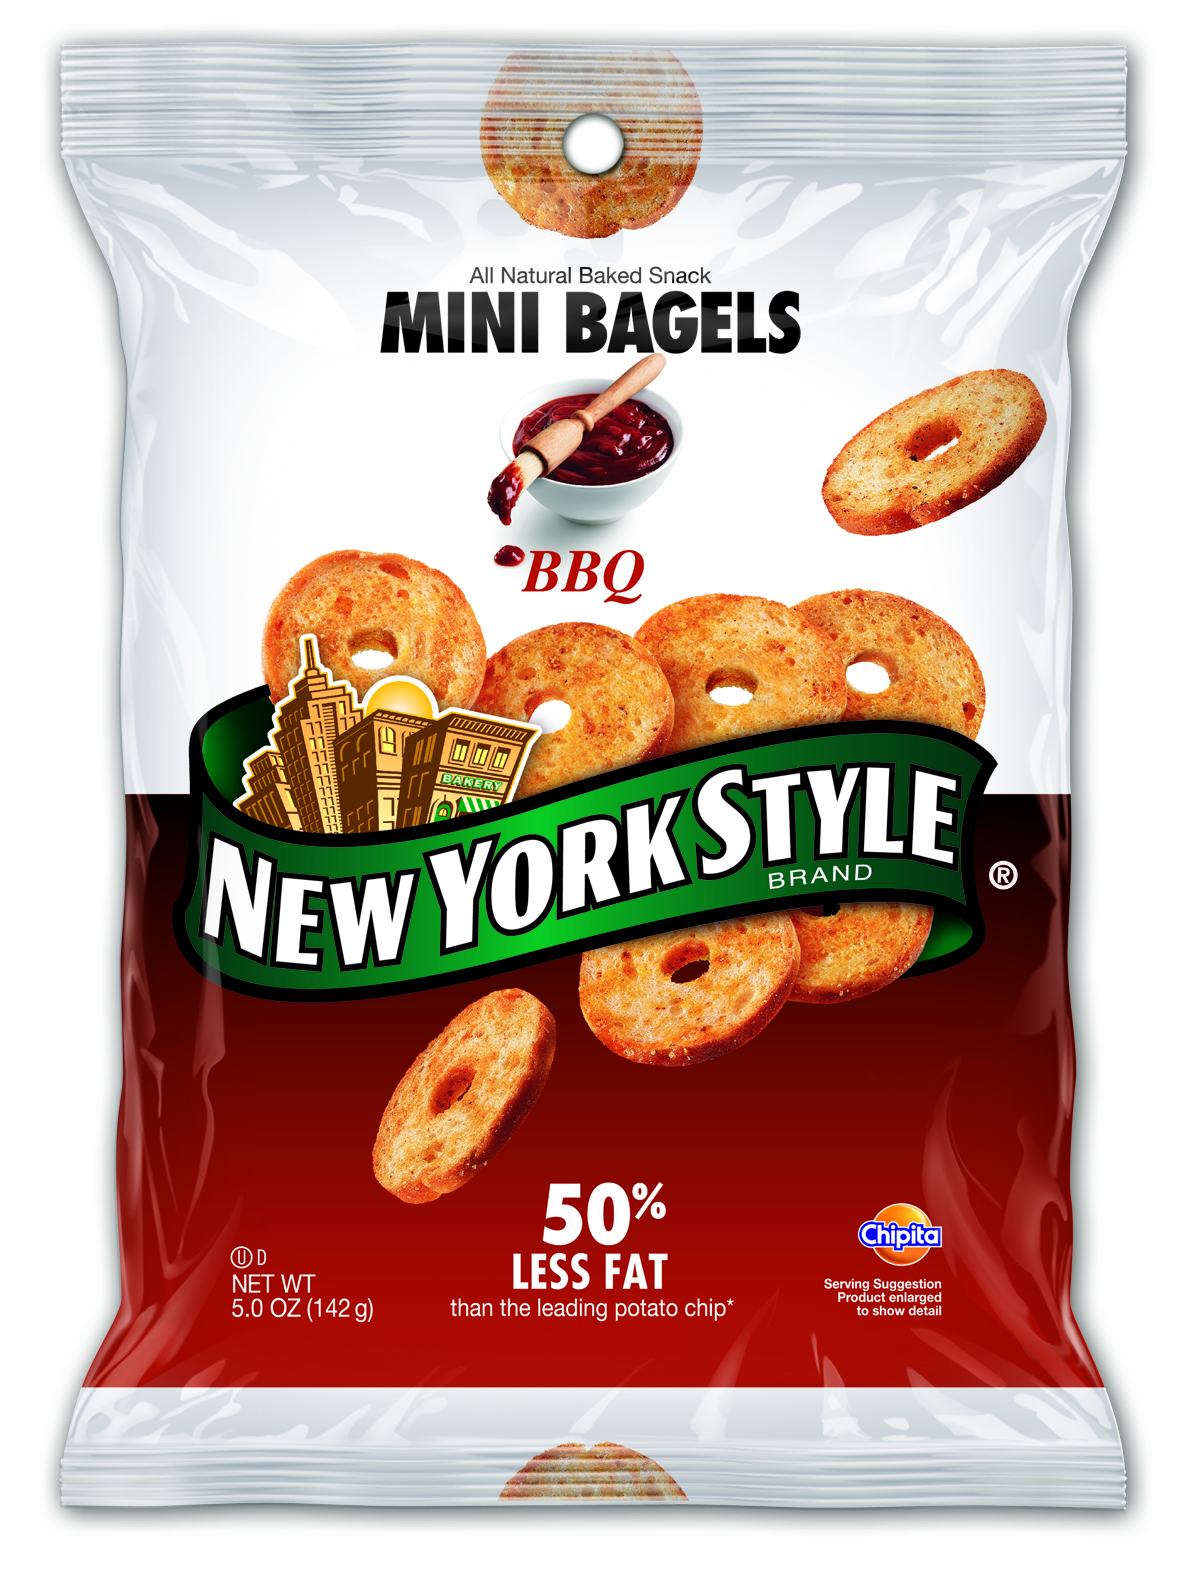 New York Style Bagel Crisps Review and Giveaway!